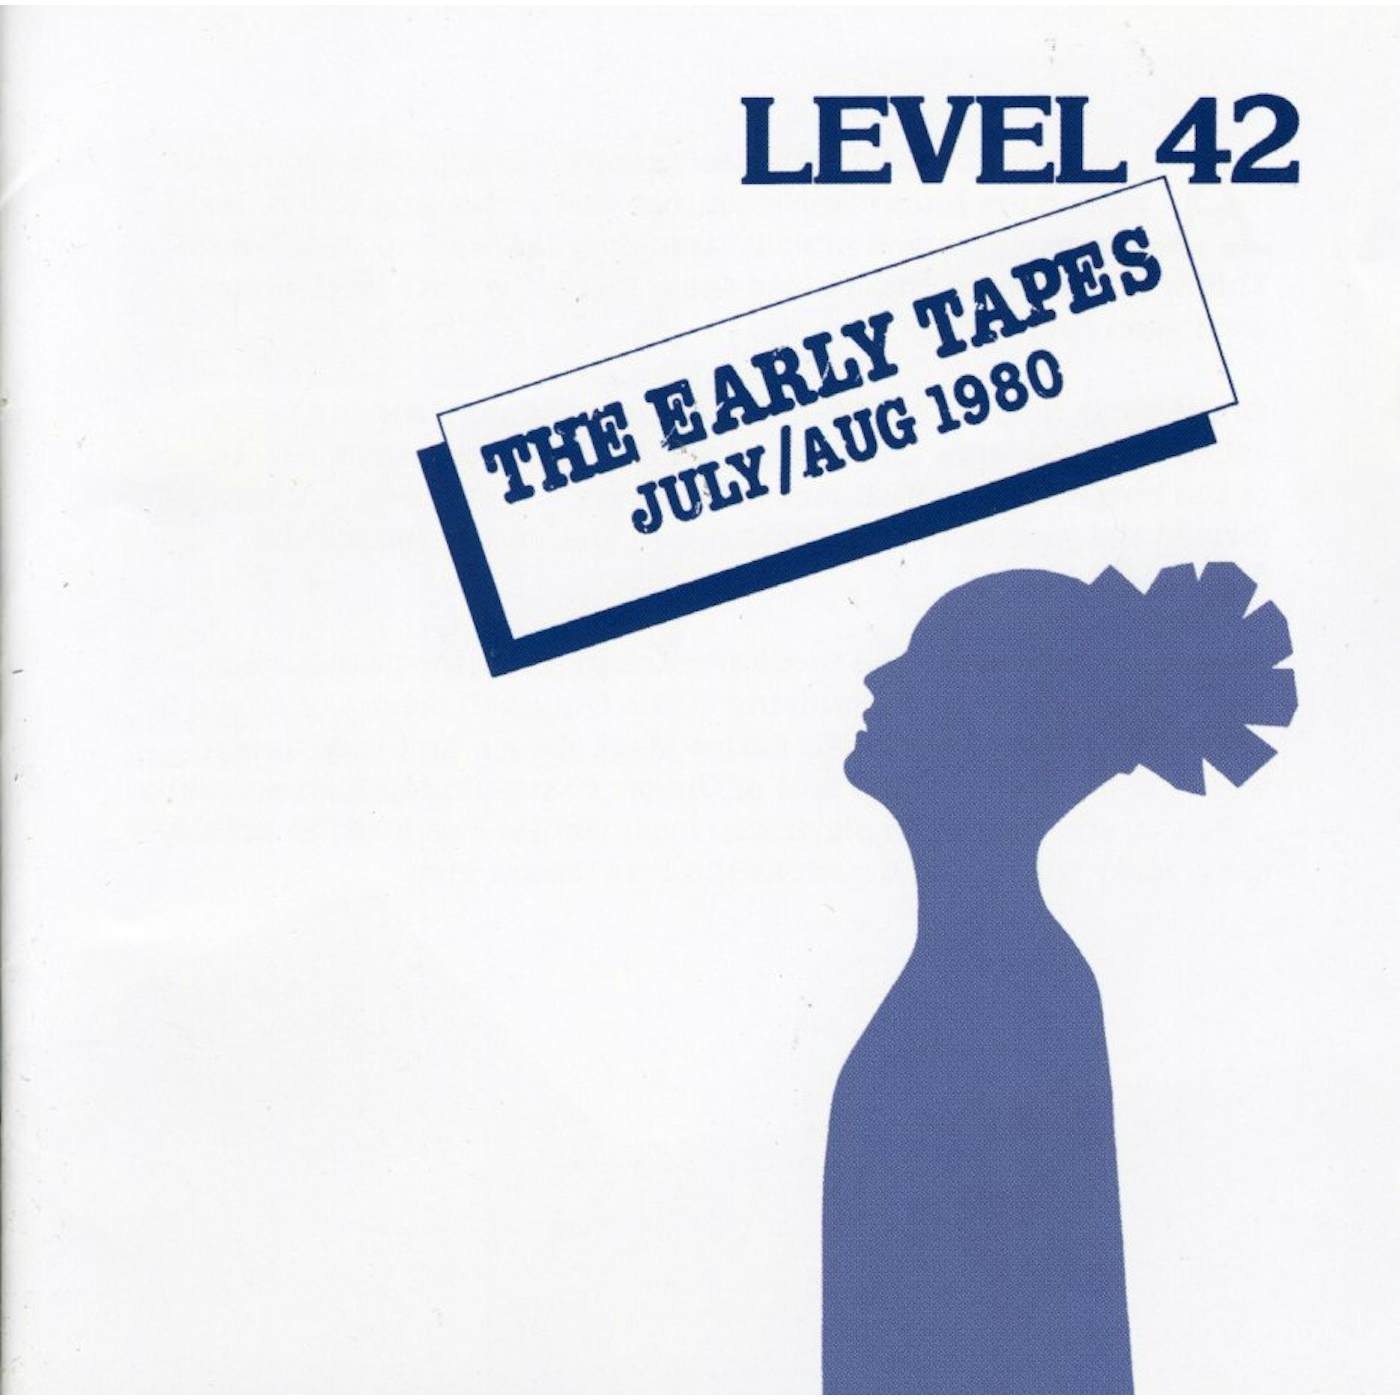 Level 42 EARLY TAPES CD